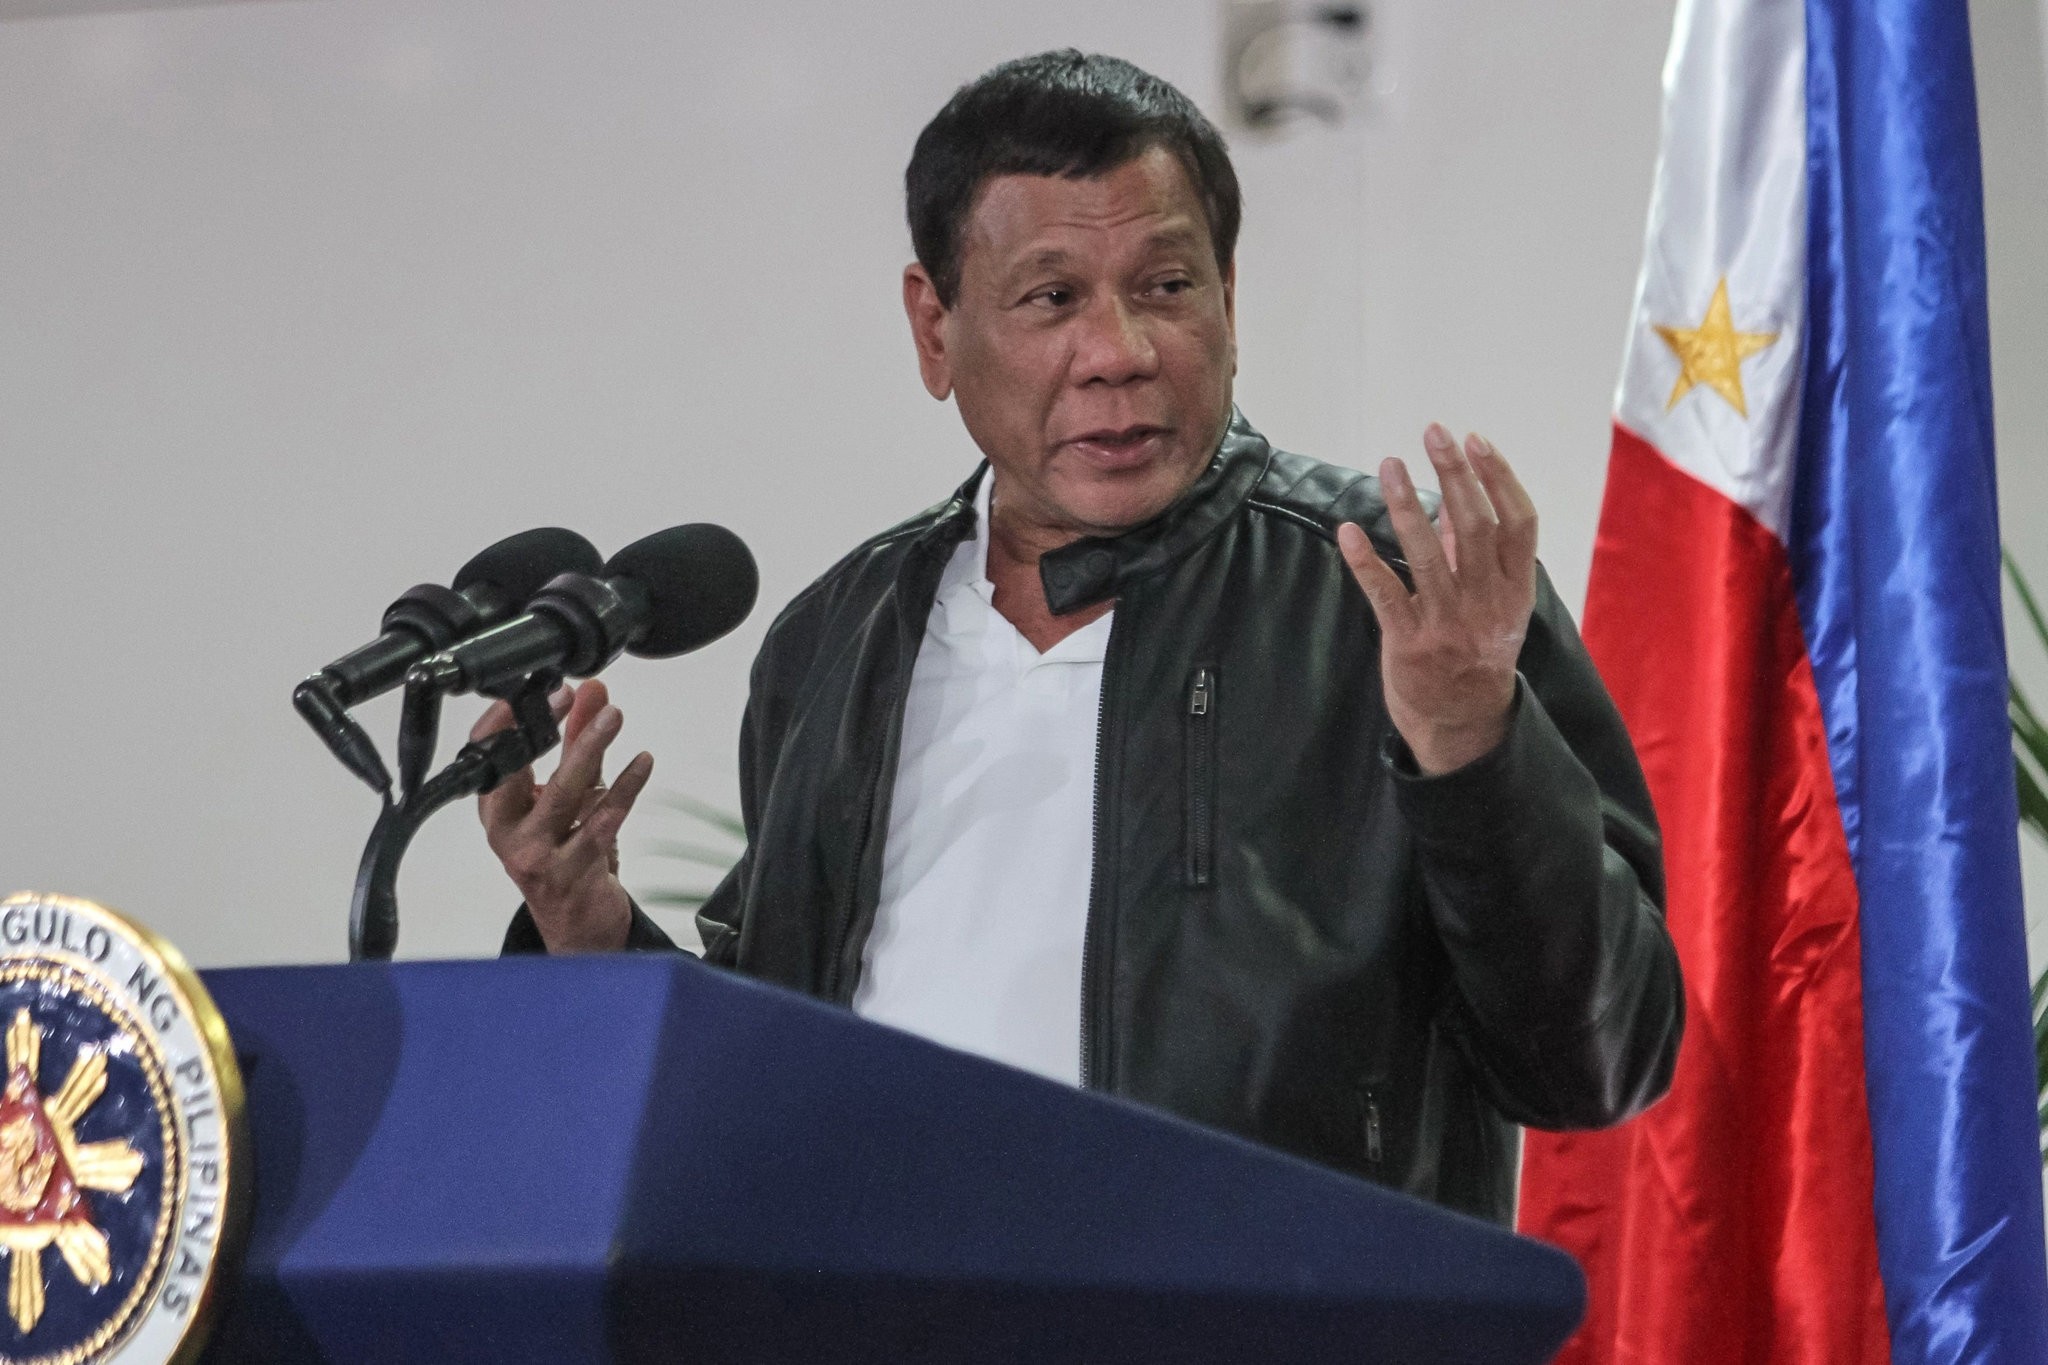 Philippine President Rodrigo Duterte gestures as he speaks shortly after arriving in Davao on May 16, 2017, from a working visit to China. (AFP Photo)